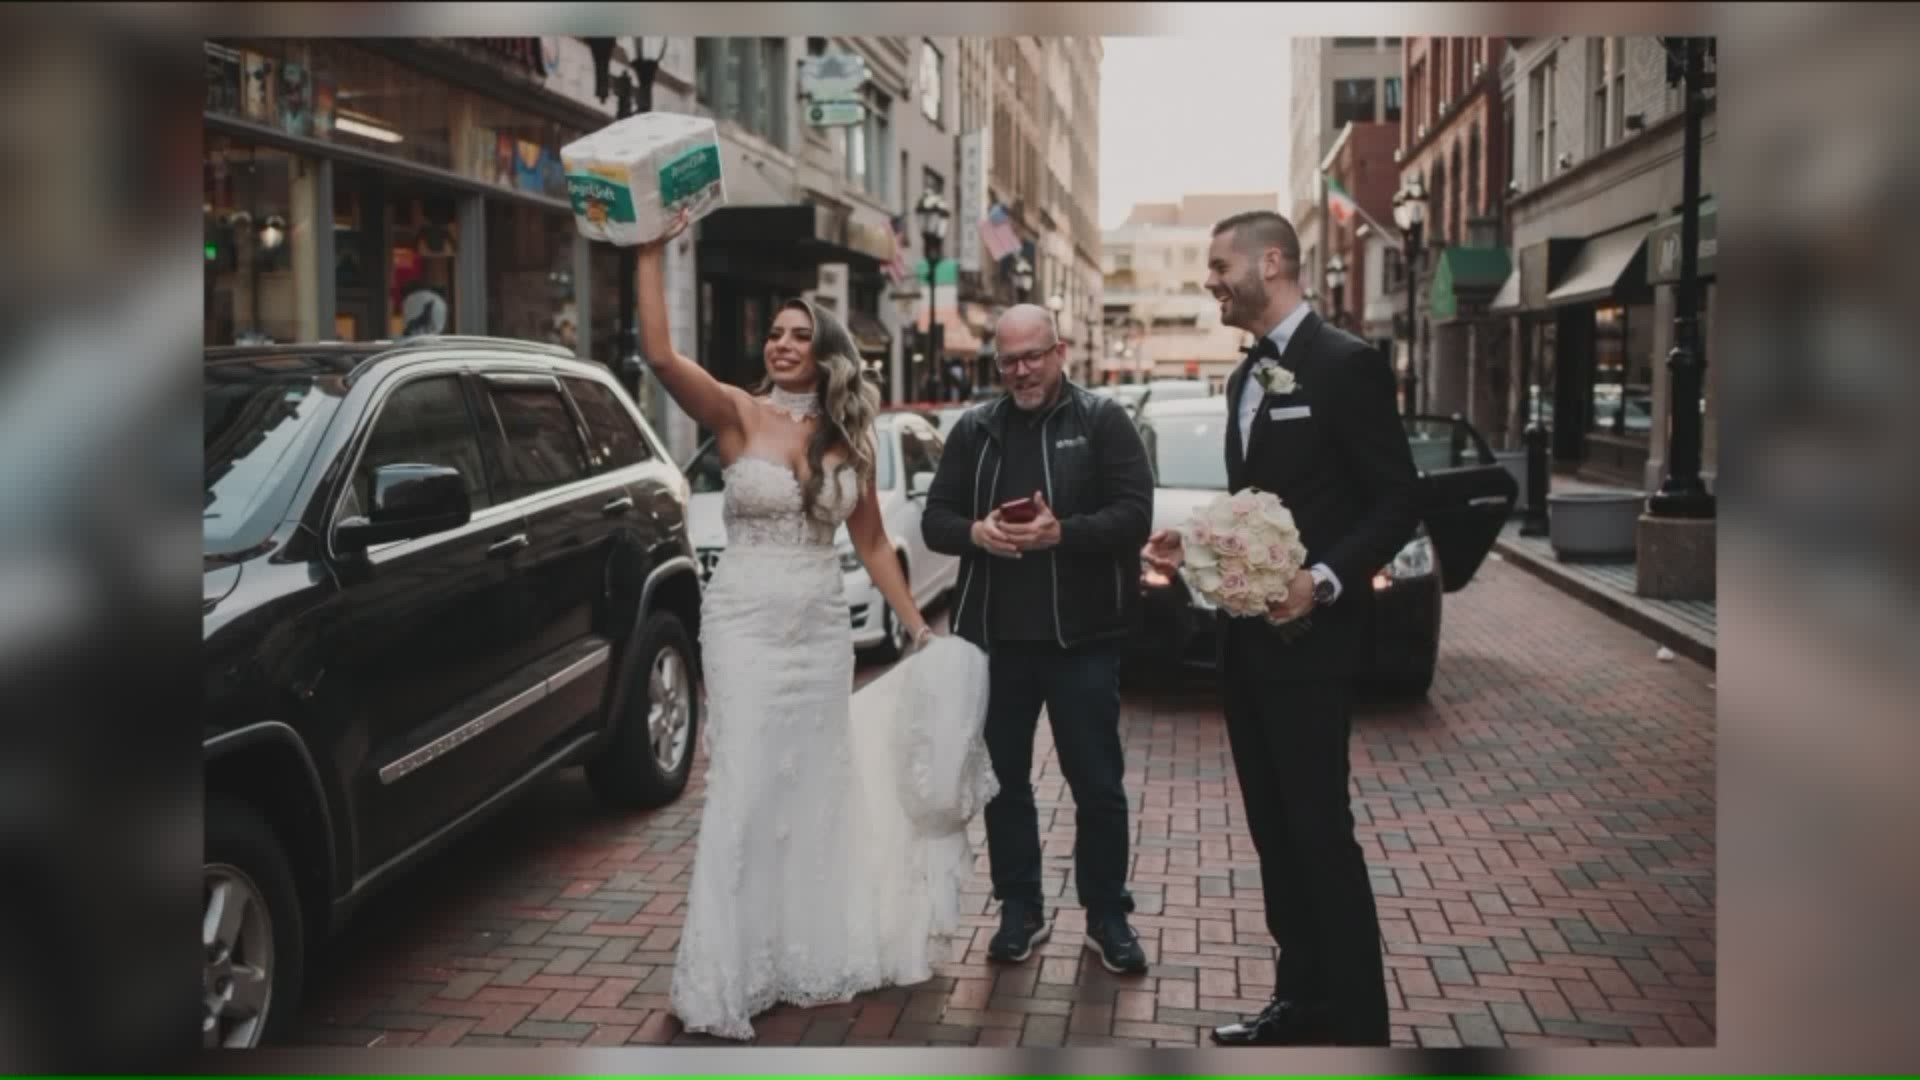 While taking wedding photos, Alex and Shanette Meadows were approached by a complete stranger who gifted them a 12-pack of Angel Soft.